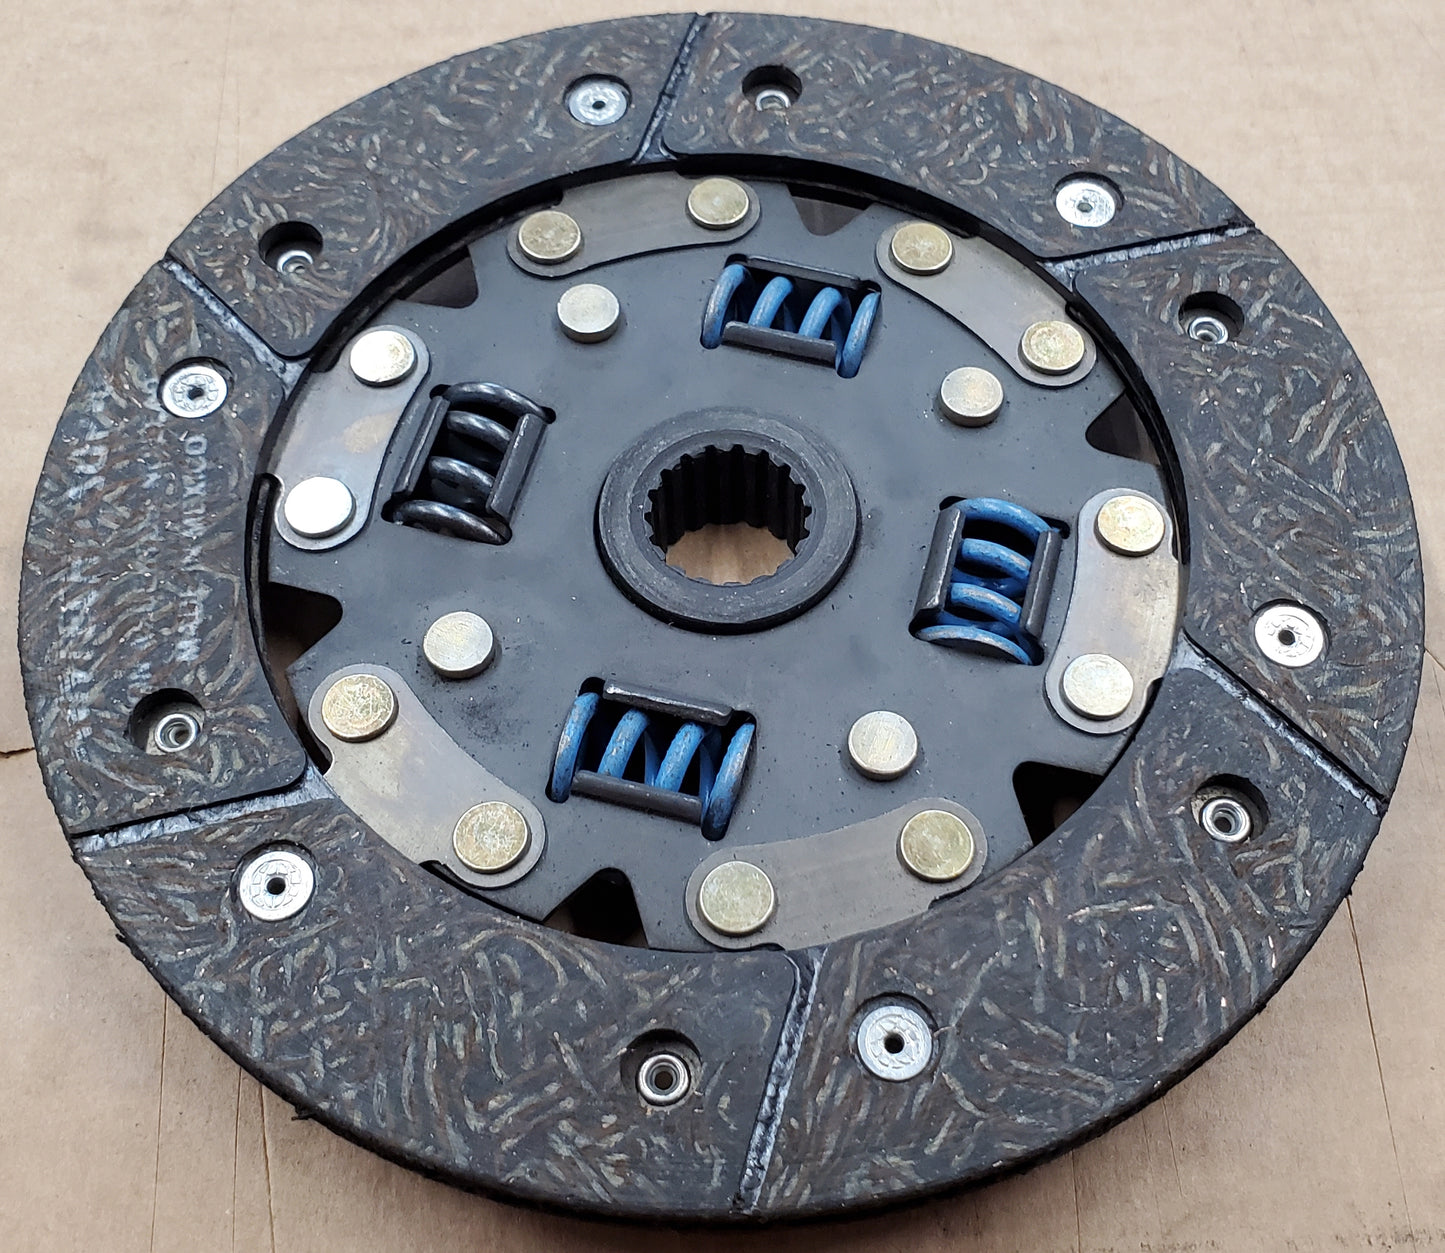 Replacement clutch friction disc for Datsun five-speed conversions (1275 engine)